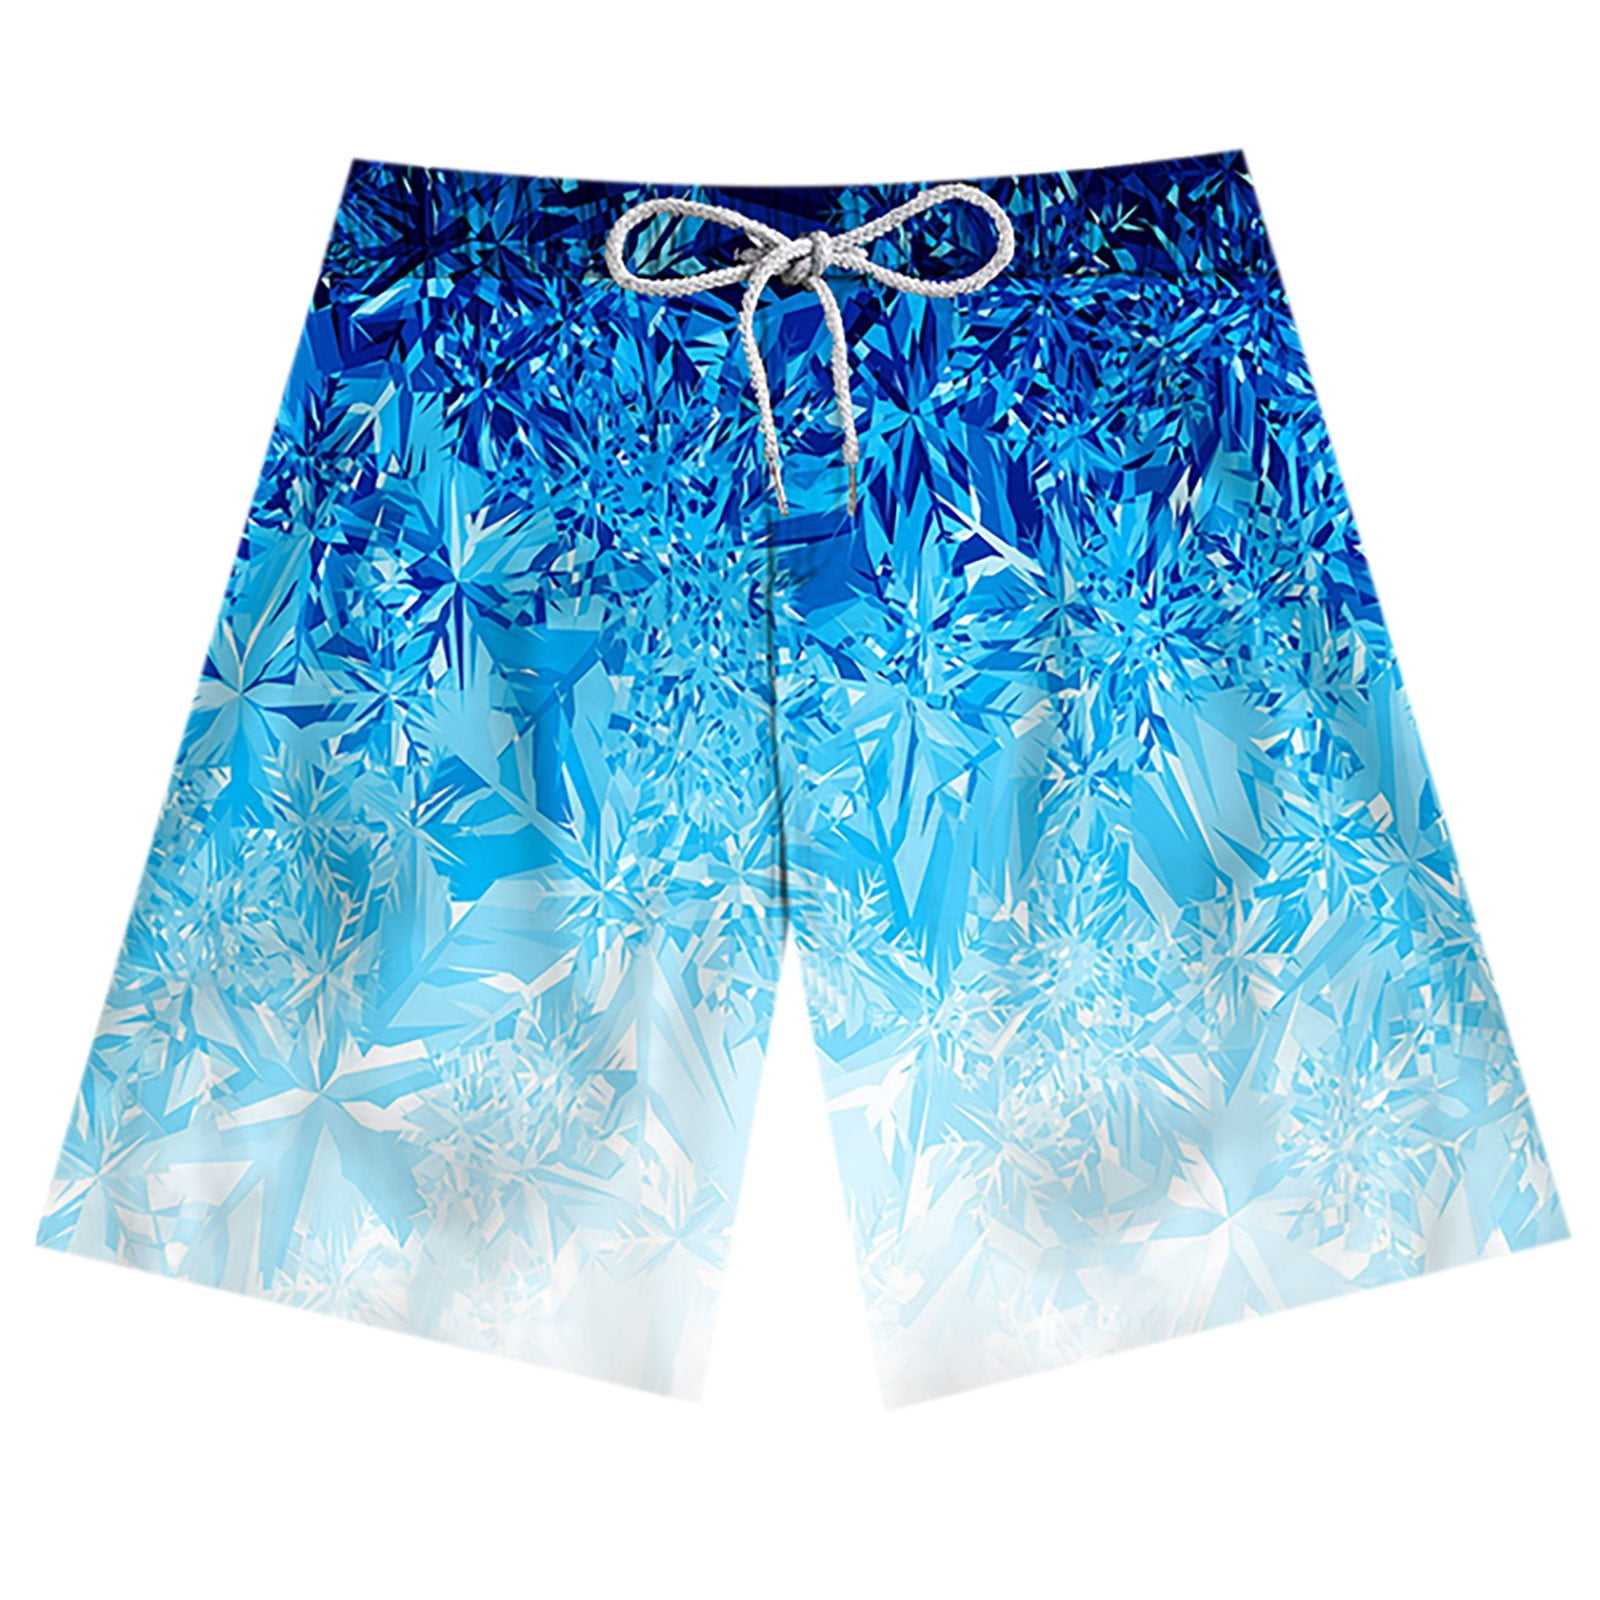 FREDRM Mens Swim Trunks Quick Dry Boardshorts with Mesh Lining Above Knee Swimwear Bathing Suits 